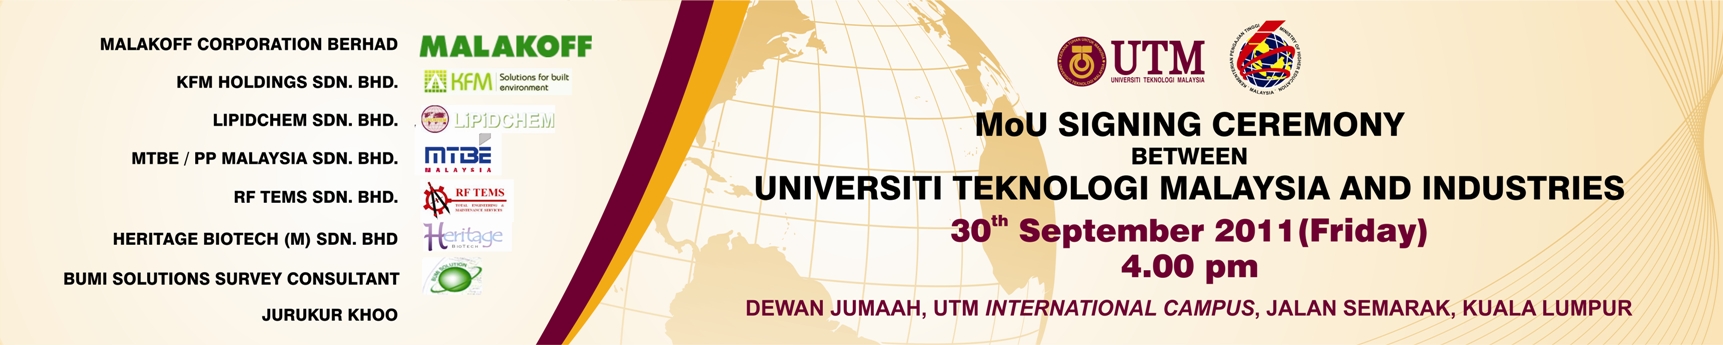 MoU Signing Ceremony between UTM and Industries.